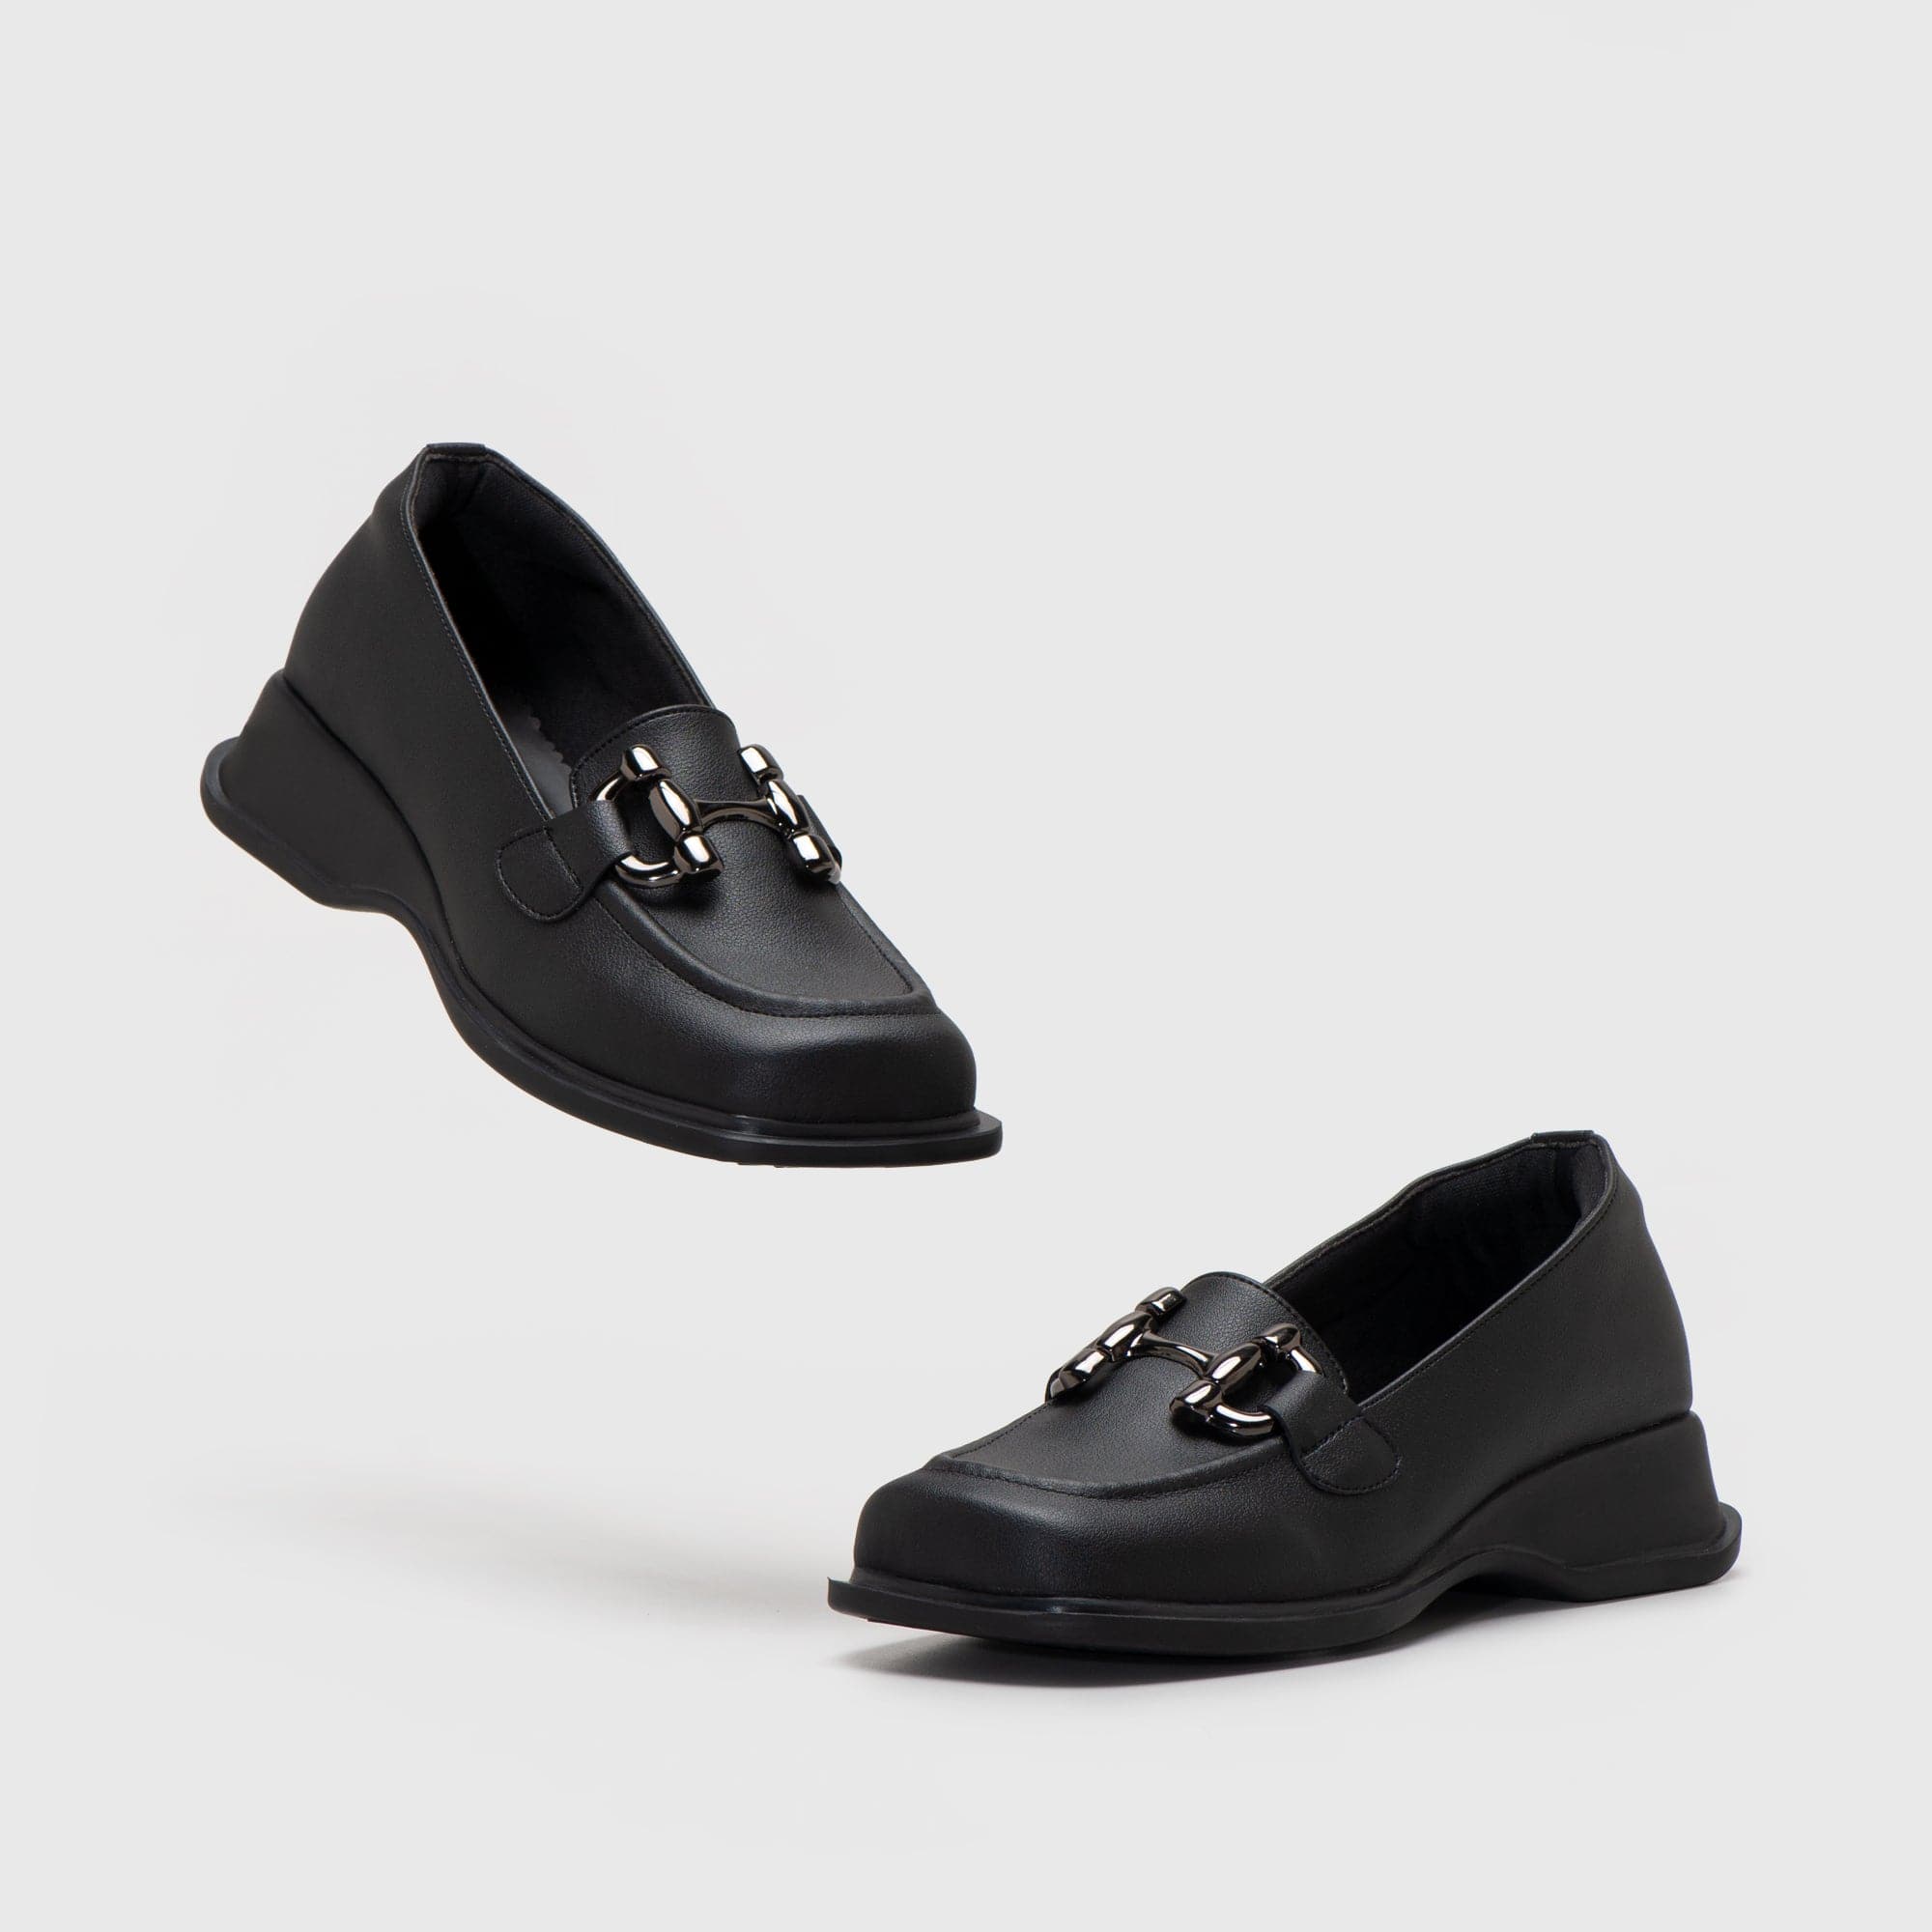 Adorable Projects Official Mini Heels Runna Loafer Black